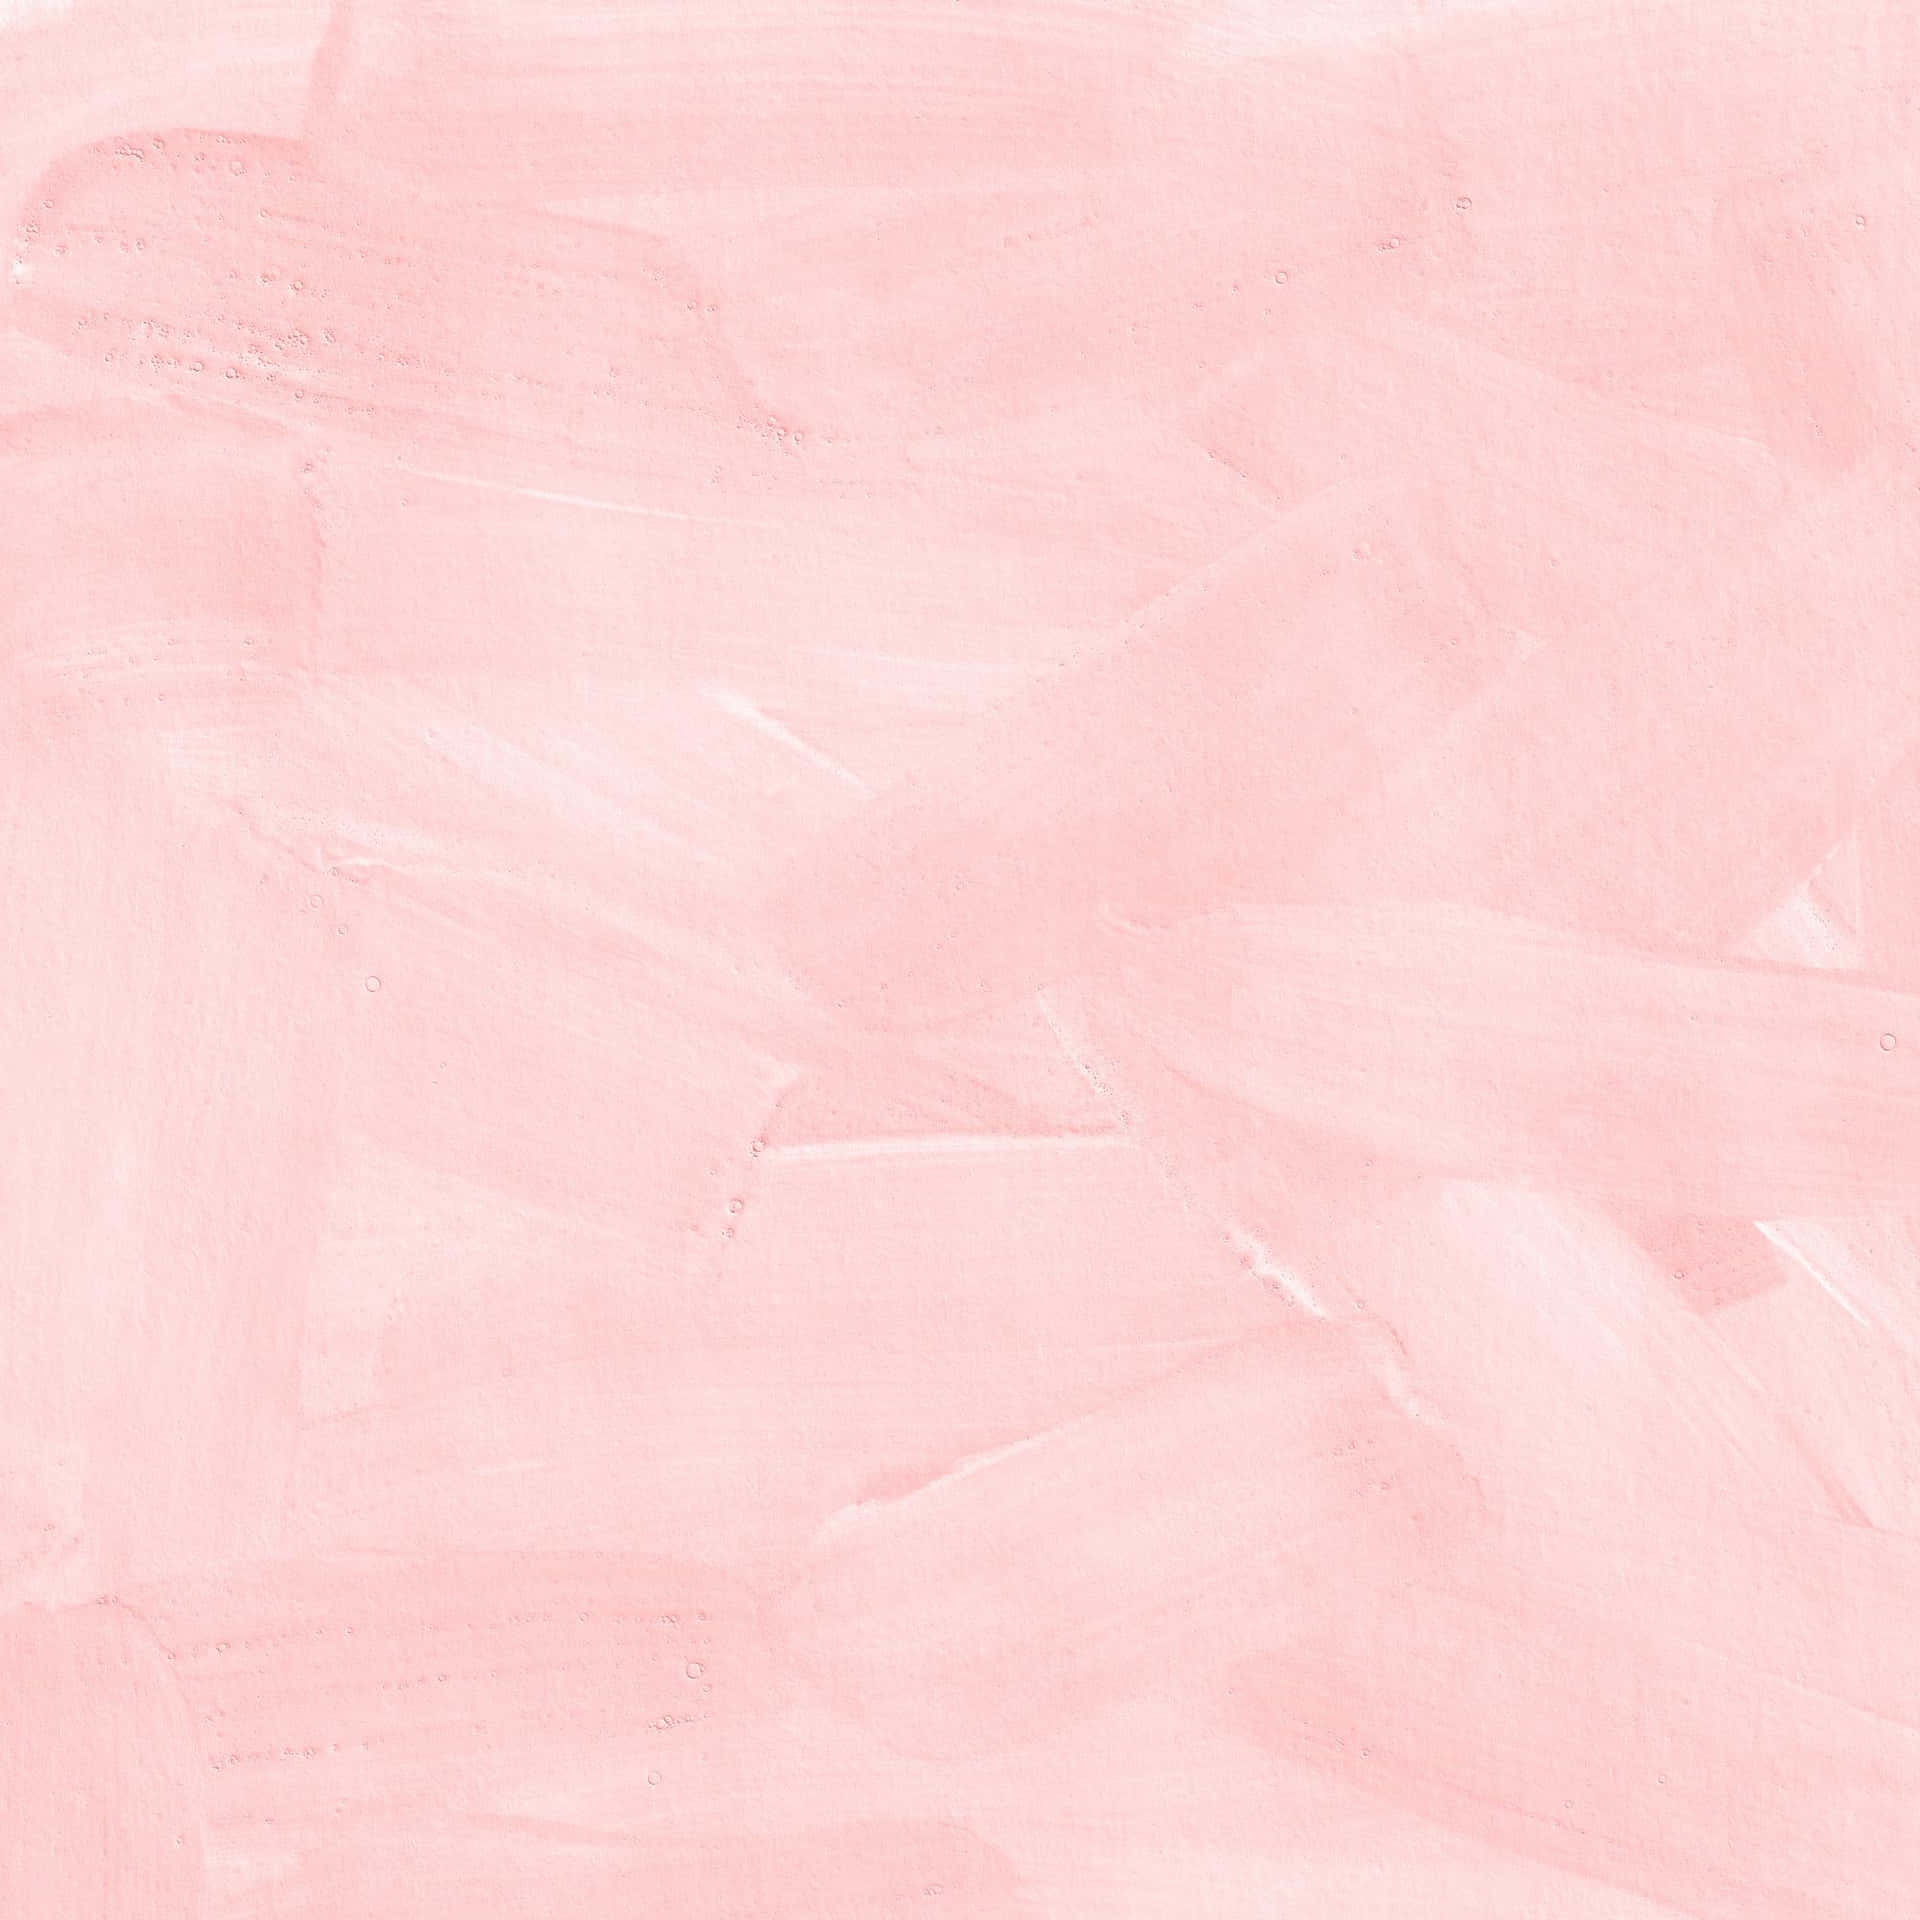 Vibrant pink texture background